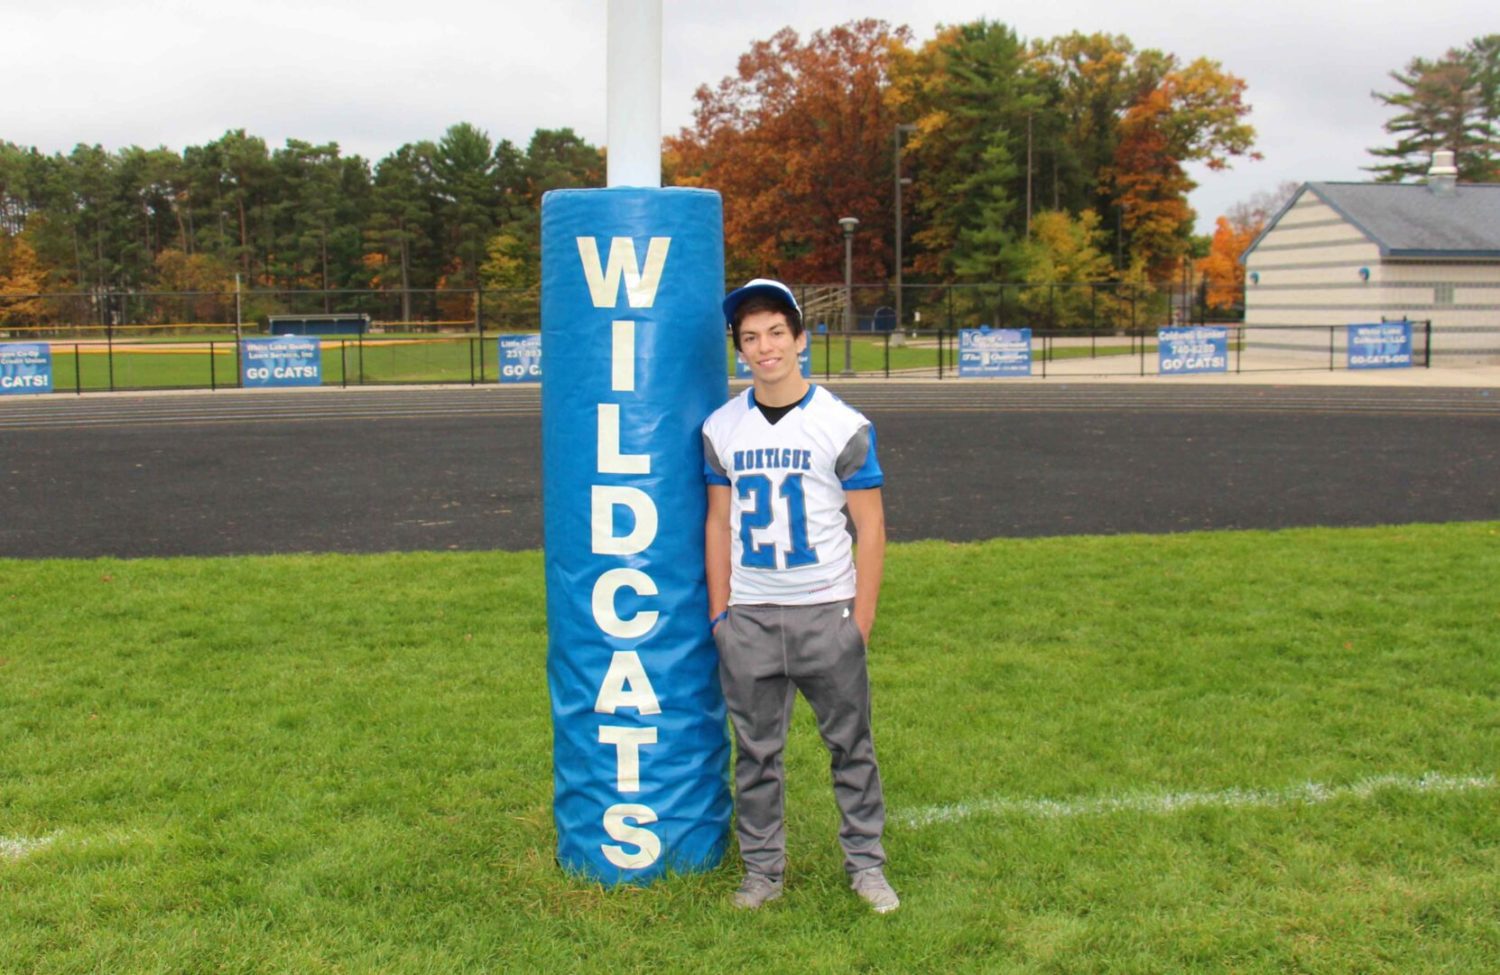 Freshman’s storybook season ends with a concussion, but his injury inspired a moment of unity on the football field